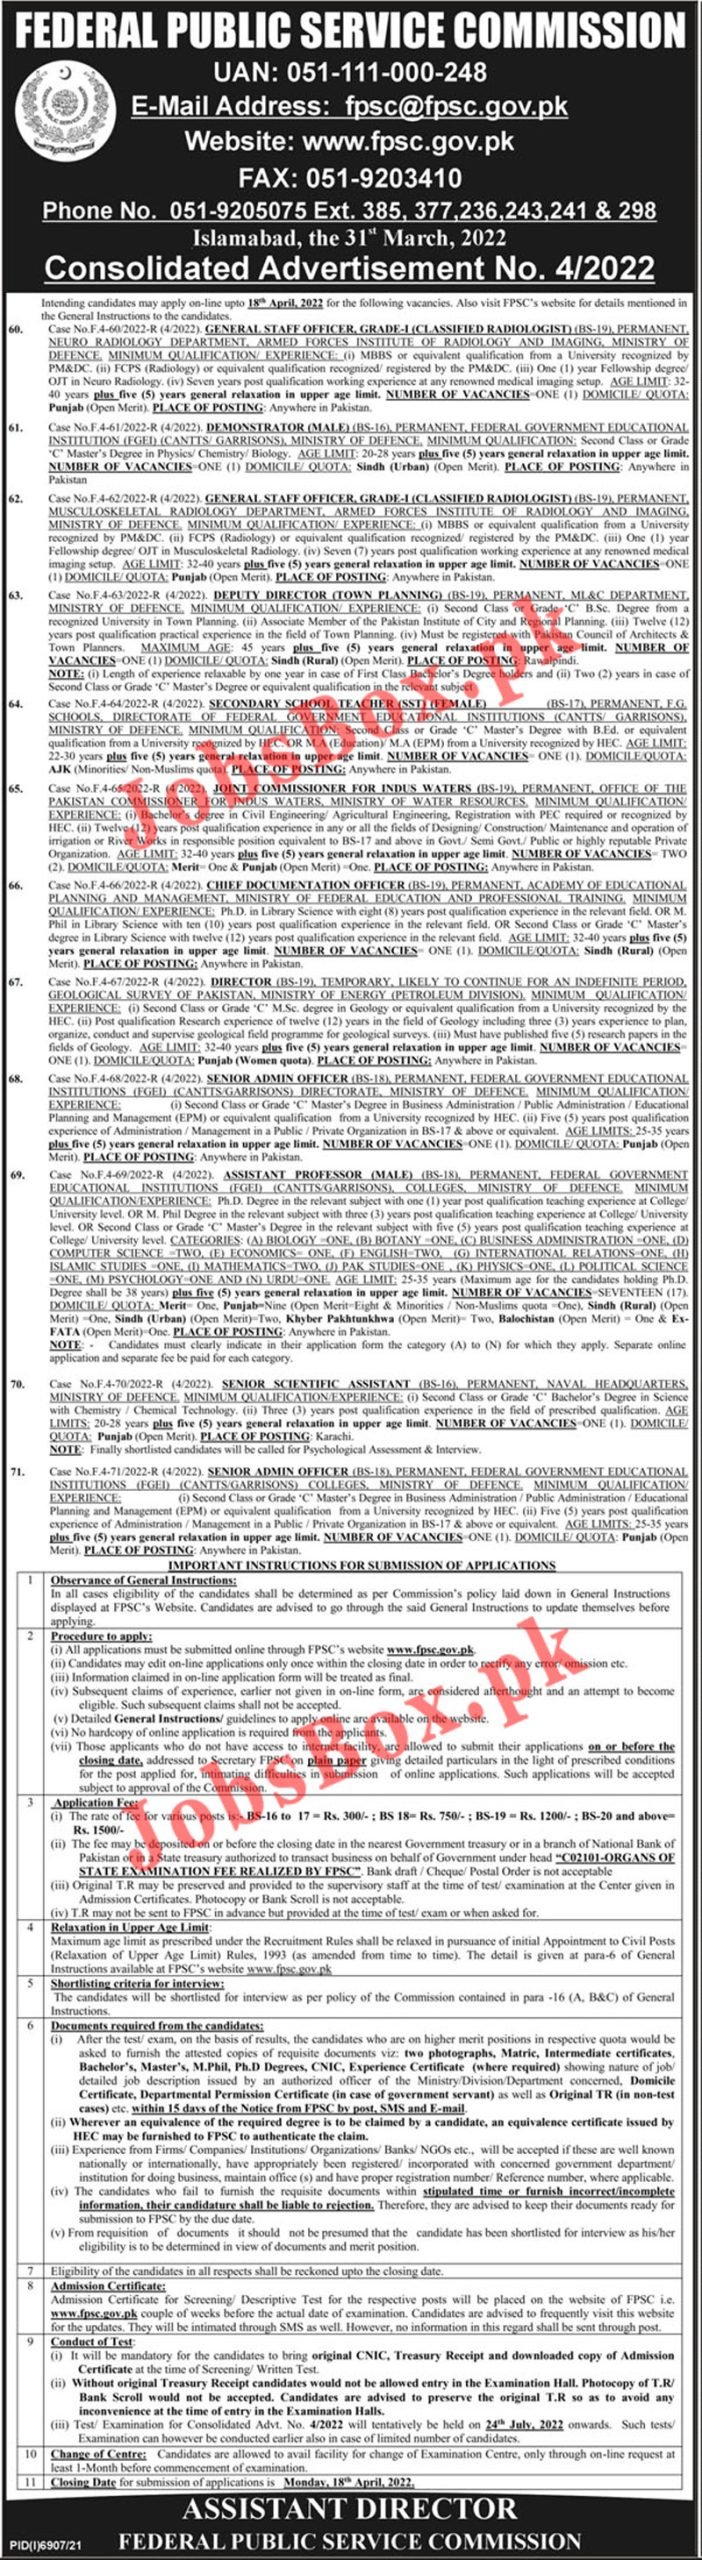 FPSC jobs 2022 Consolidated Advertisement No 04/2022